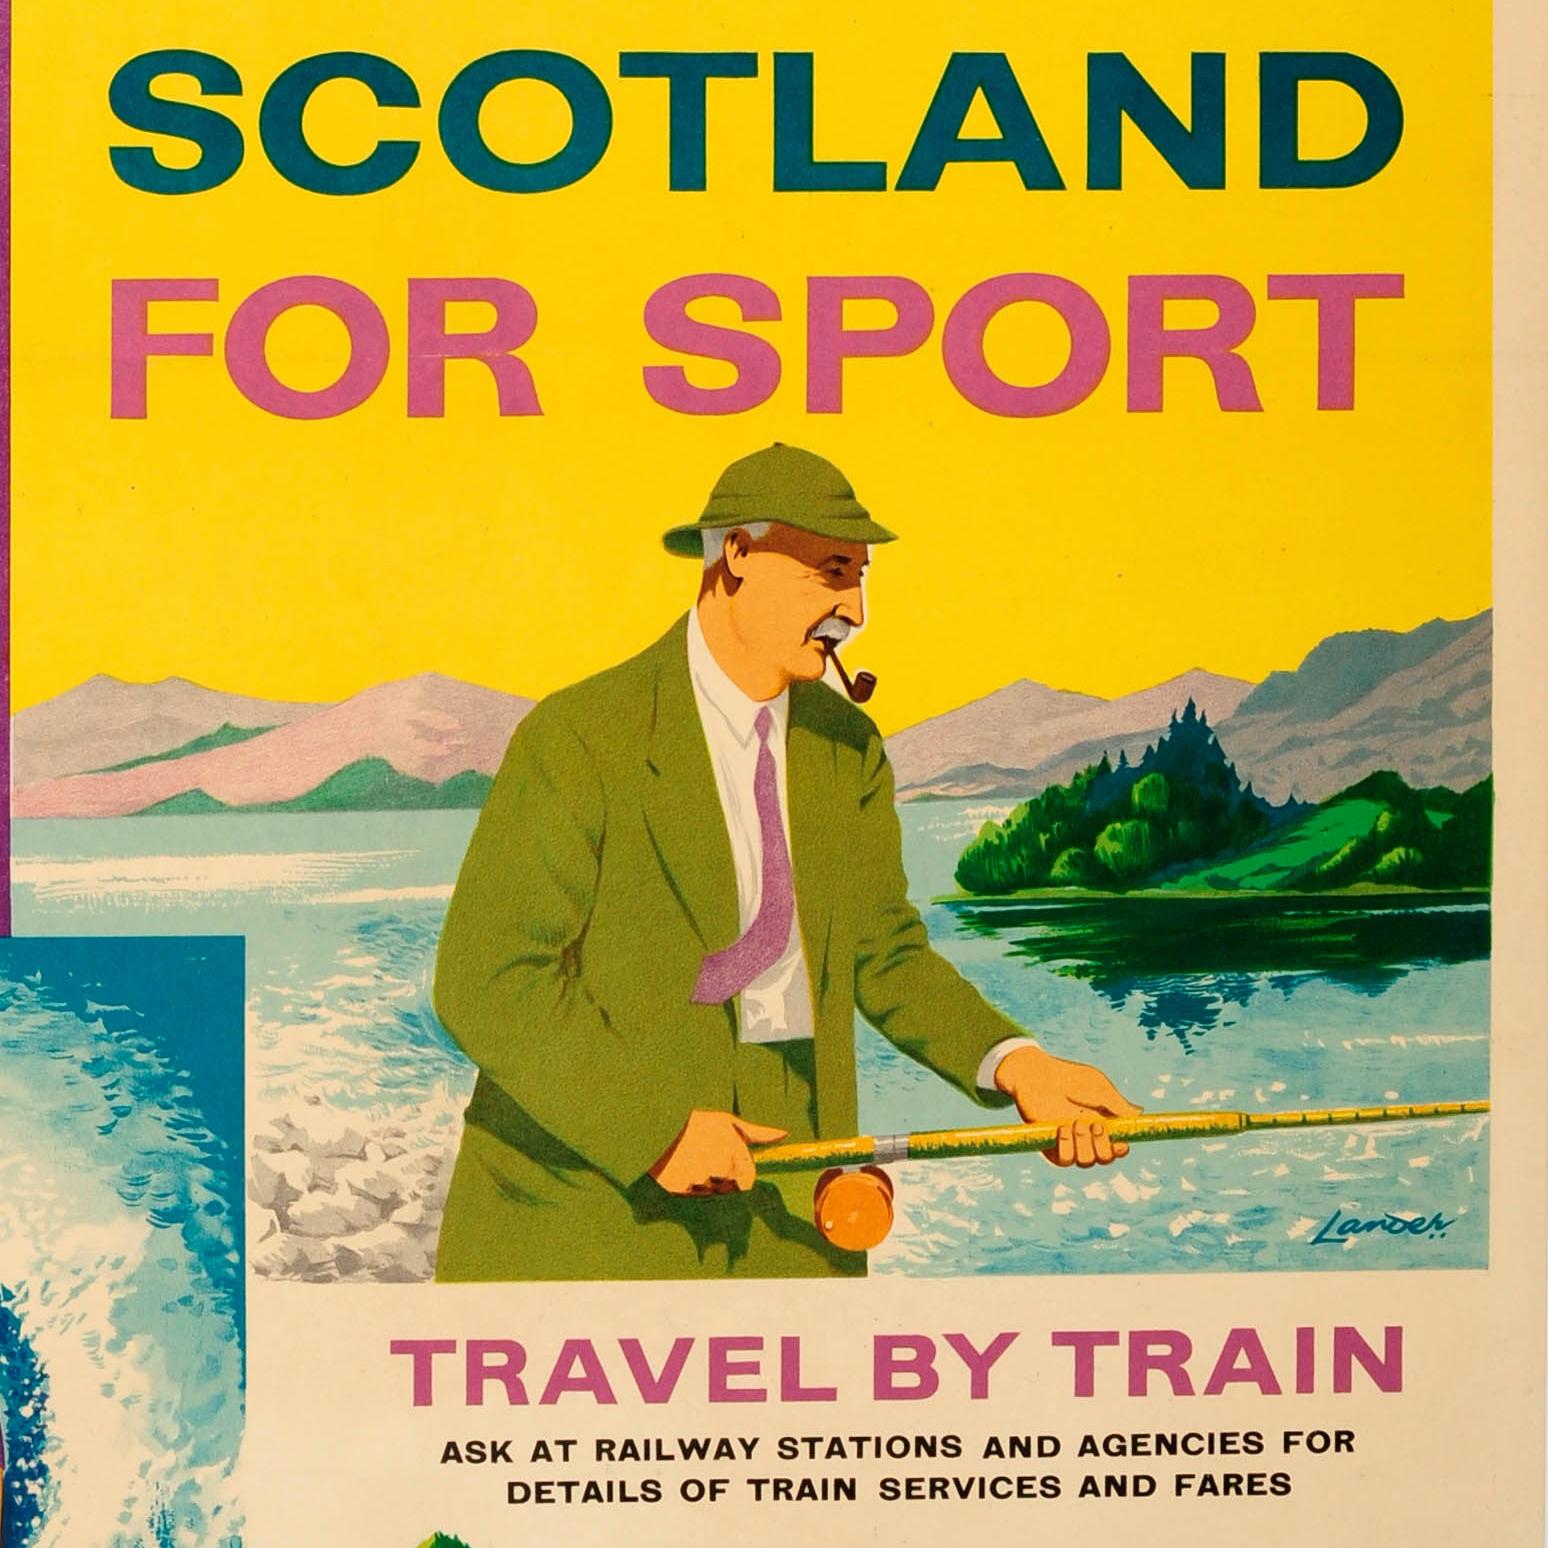 Original vintage travel poster issued by British Railways: Scotland for Sport travel by train - featuring a colourful design of small images depicting people enjoying the various sporting activities on offer in Scotland: a man playing golf, a skier